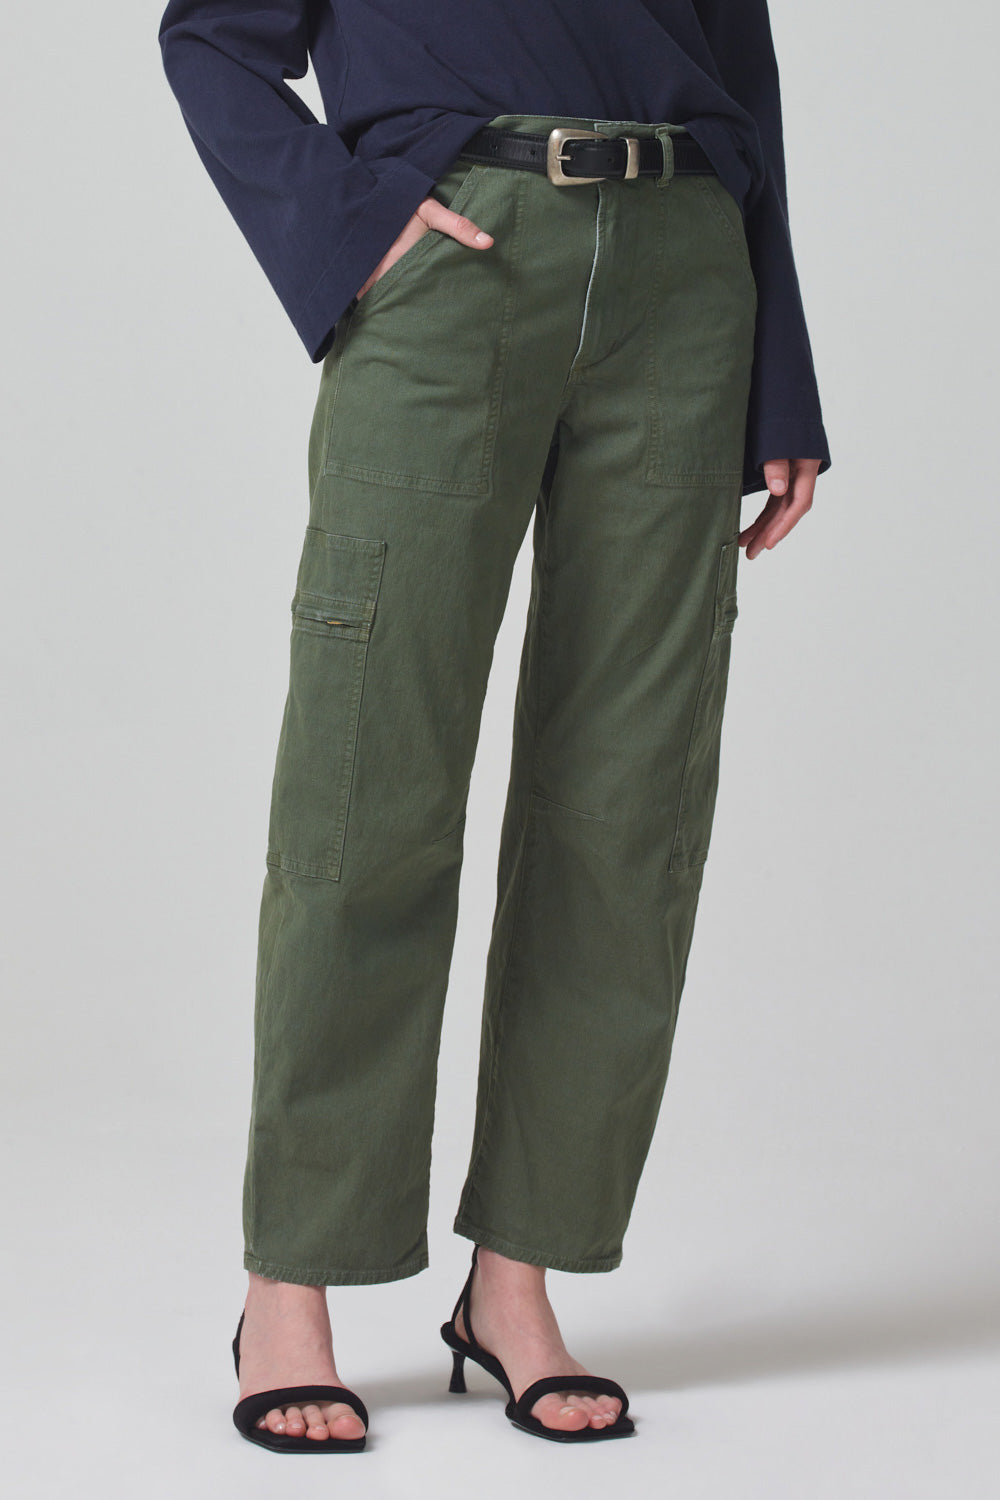 Marcelle Low Slung Easy Cargo Pants Citizens of Humanity   